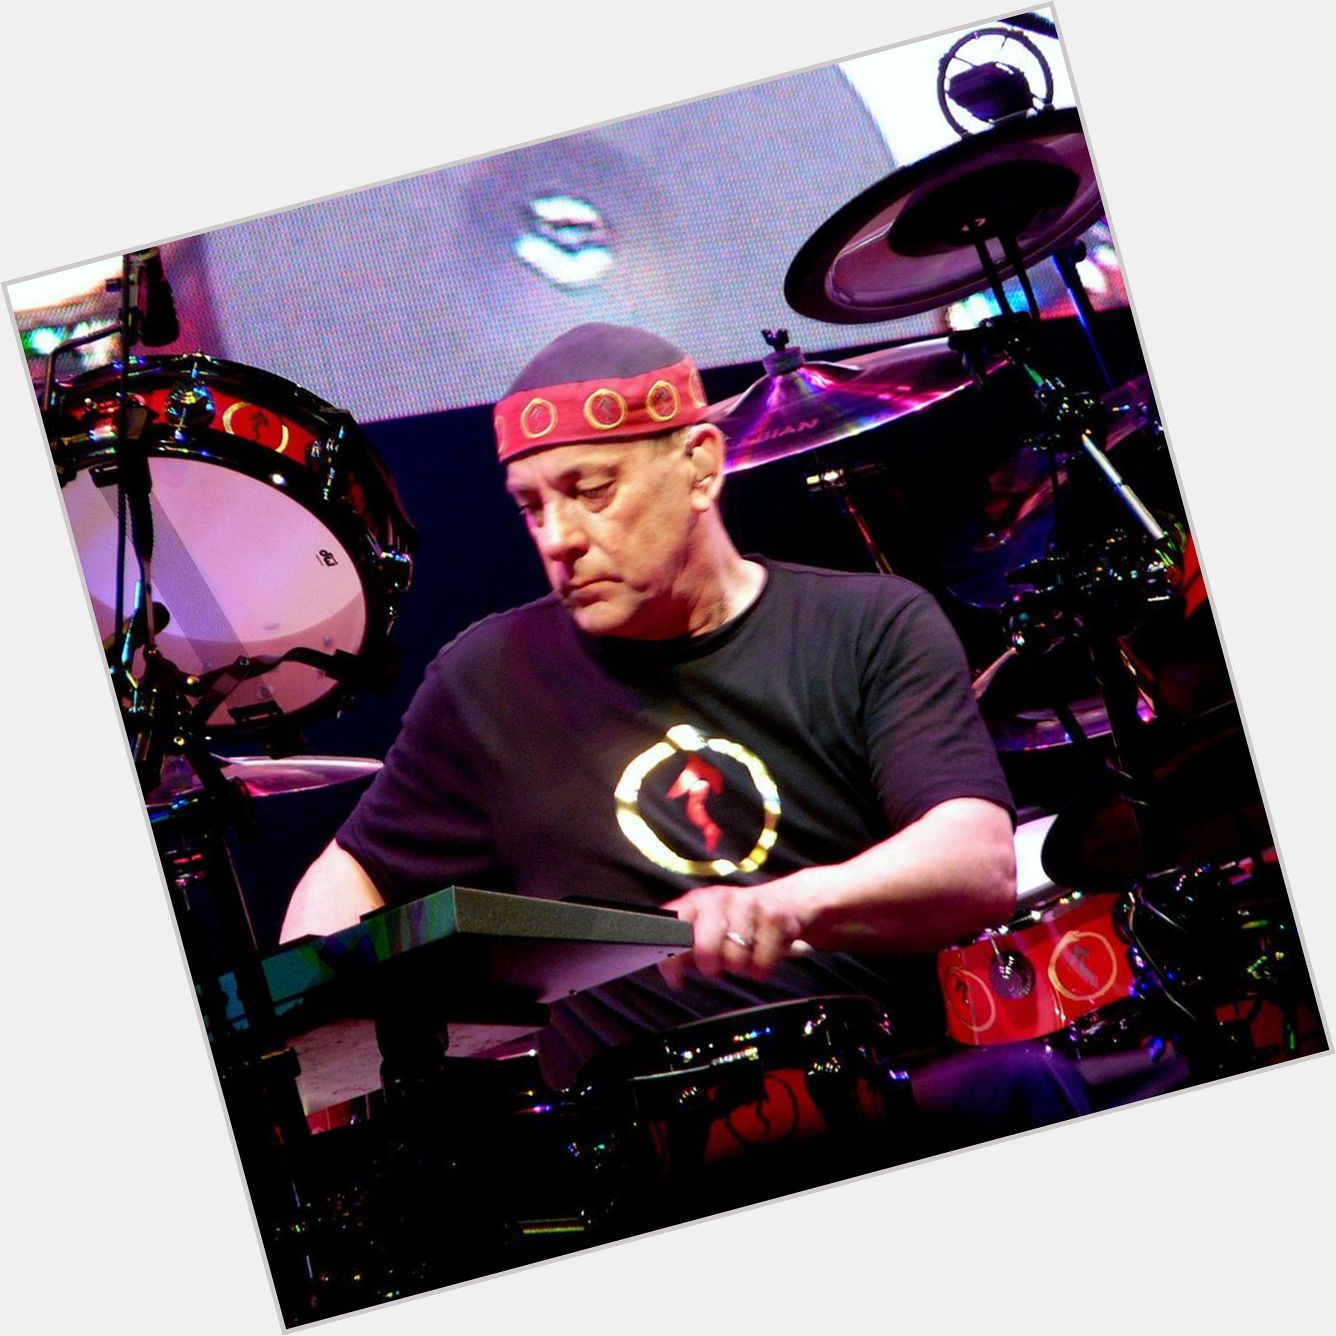 Happy birthday to drummer Neil Peart 

Pic: Weatherman90 under license  